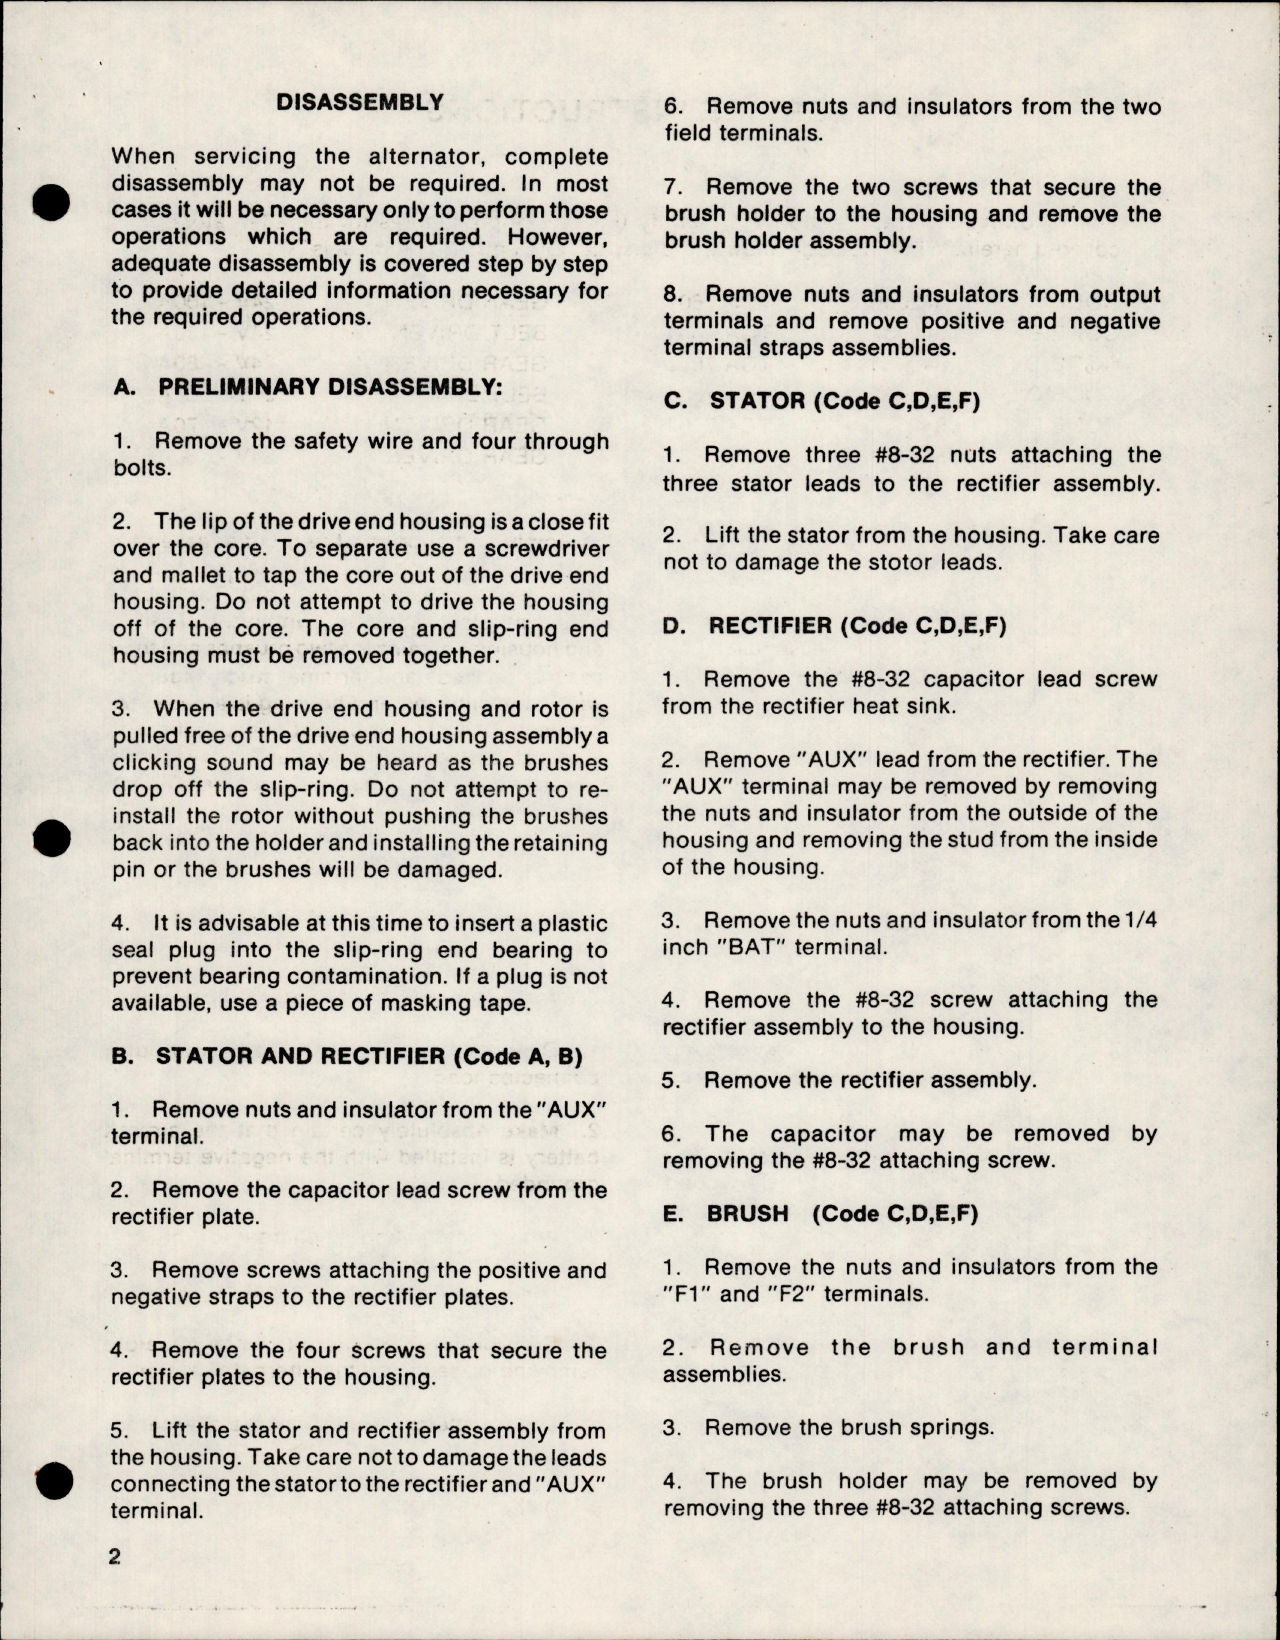 Sample page 5 from AirCorps Library document: Service Instructions for Aircraft Alternator